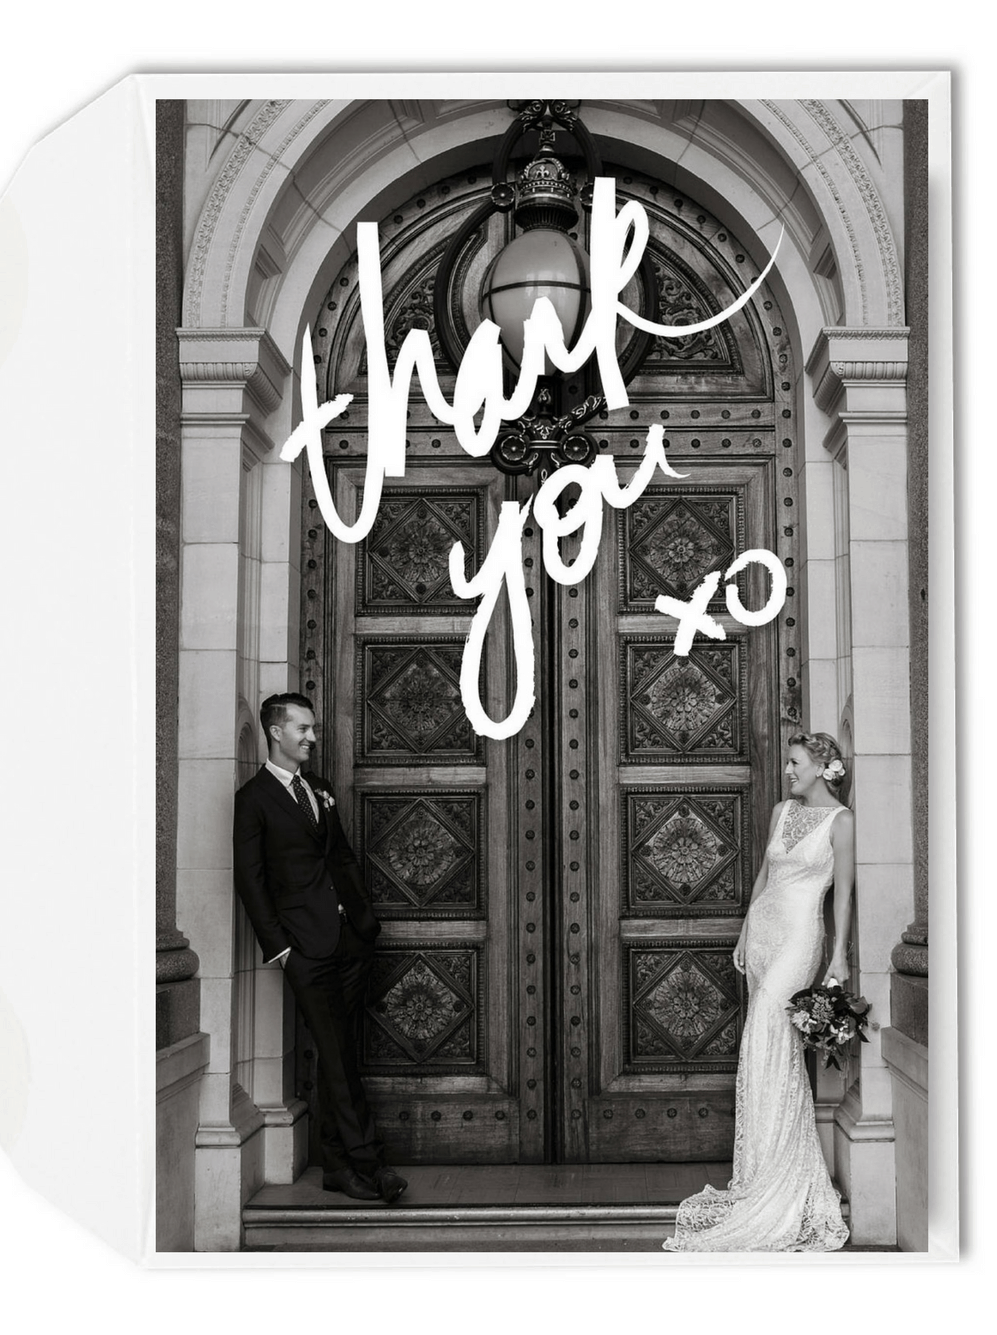 thank you card wording ideas for guests who didn't attend